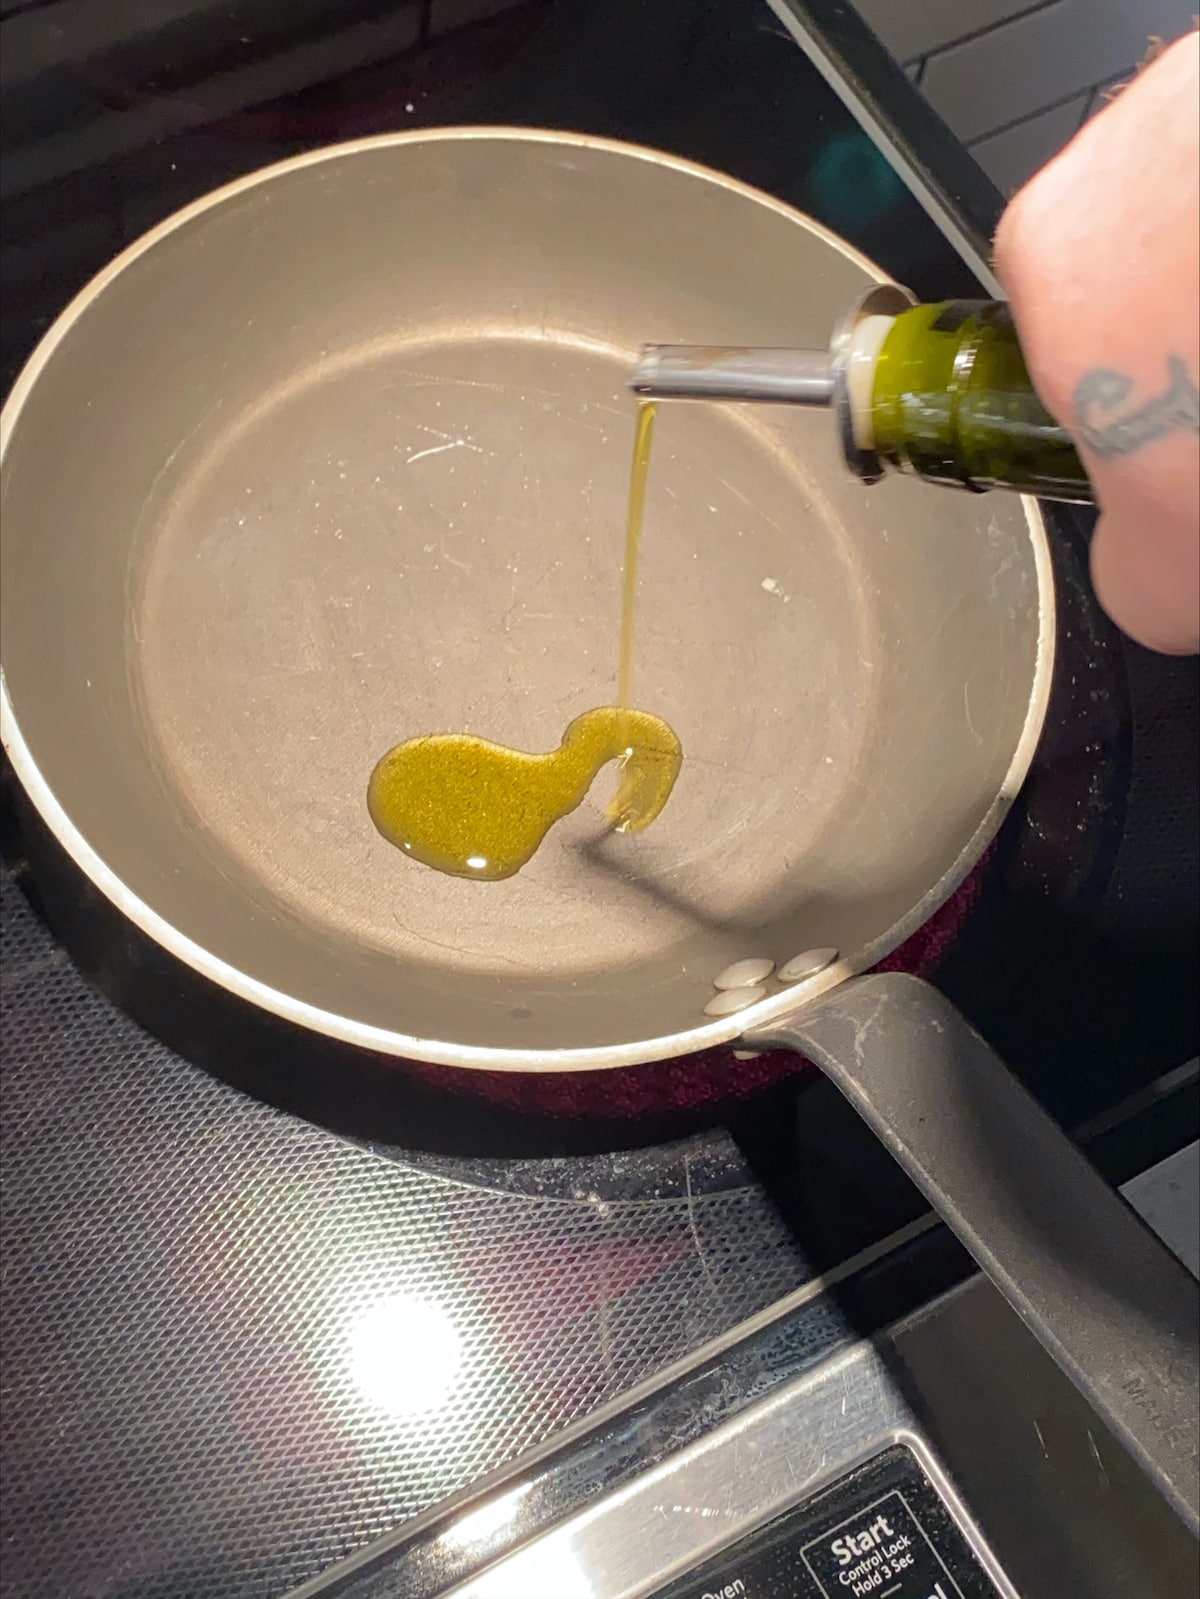 Adding oil to the pan.